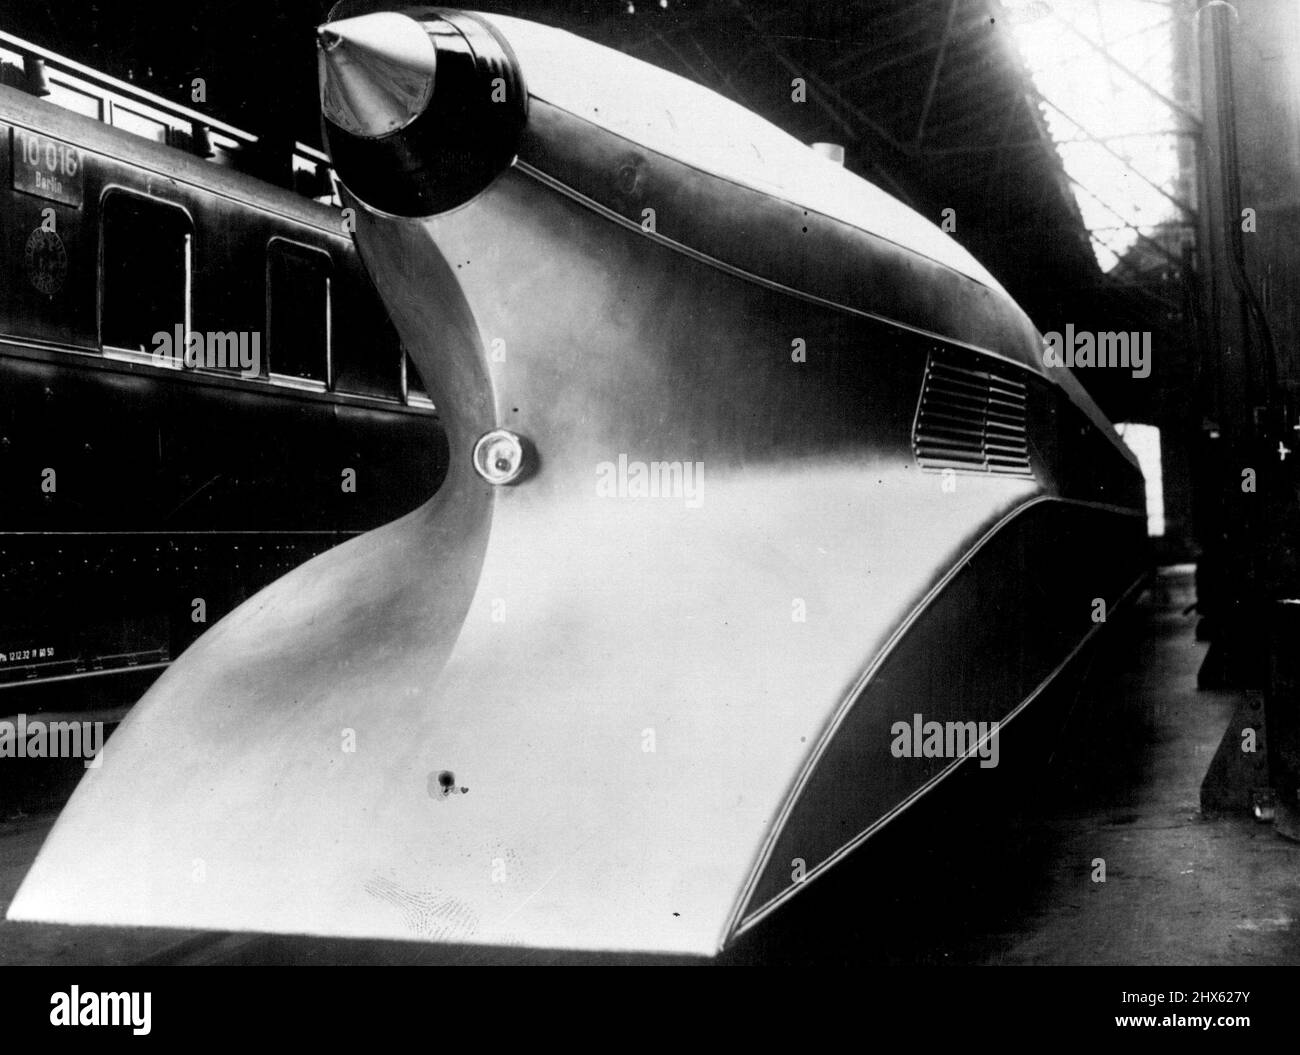 The Re-constructed Rail Zeppelin without its air propeller. The famous kruckenberg Rail Zeppelin, whose remarkable speed recently caused a sensation throughout the world, has been completely rebuilt without an air propeller. The Rail Zeppelin arrived at Berlin Grunewald on March 27th., To undergo extensive trials. May 8, 1933. (Photo by Sport & General Press Agency, Ltd.).;The Re-constructed Rail Zeppelin without its air propeller. The famous kruckenberg Rail Zeppelin, whose remarkable speed re Stock Photo